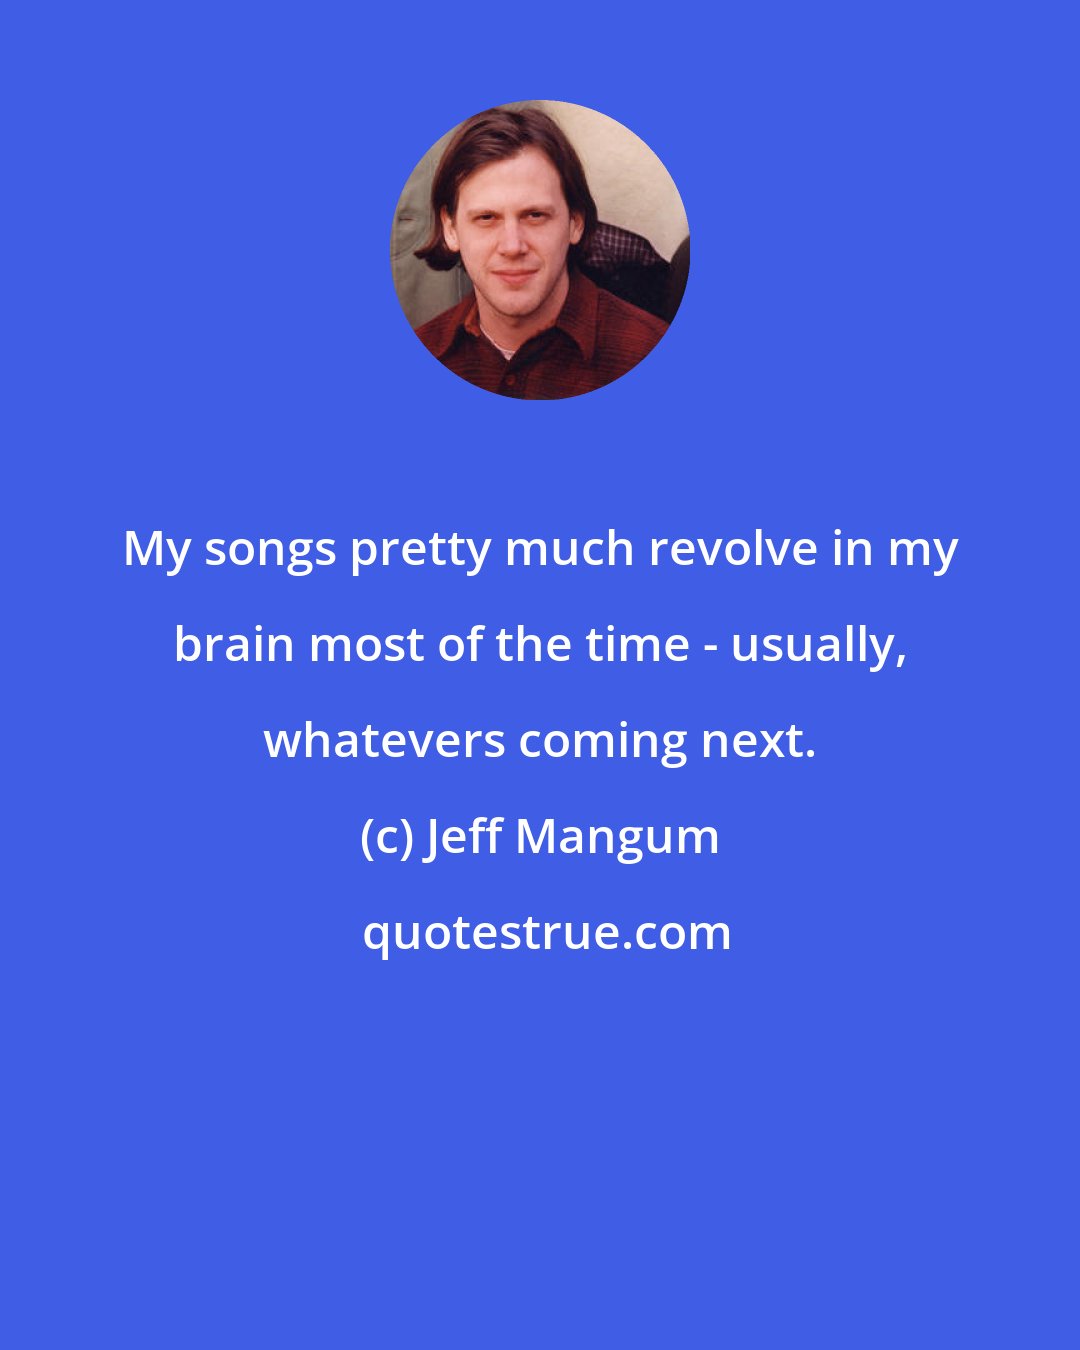 Jeff Mangum: My songs pretty much revolve in my brain most of the time - usually, whatevers coming next.